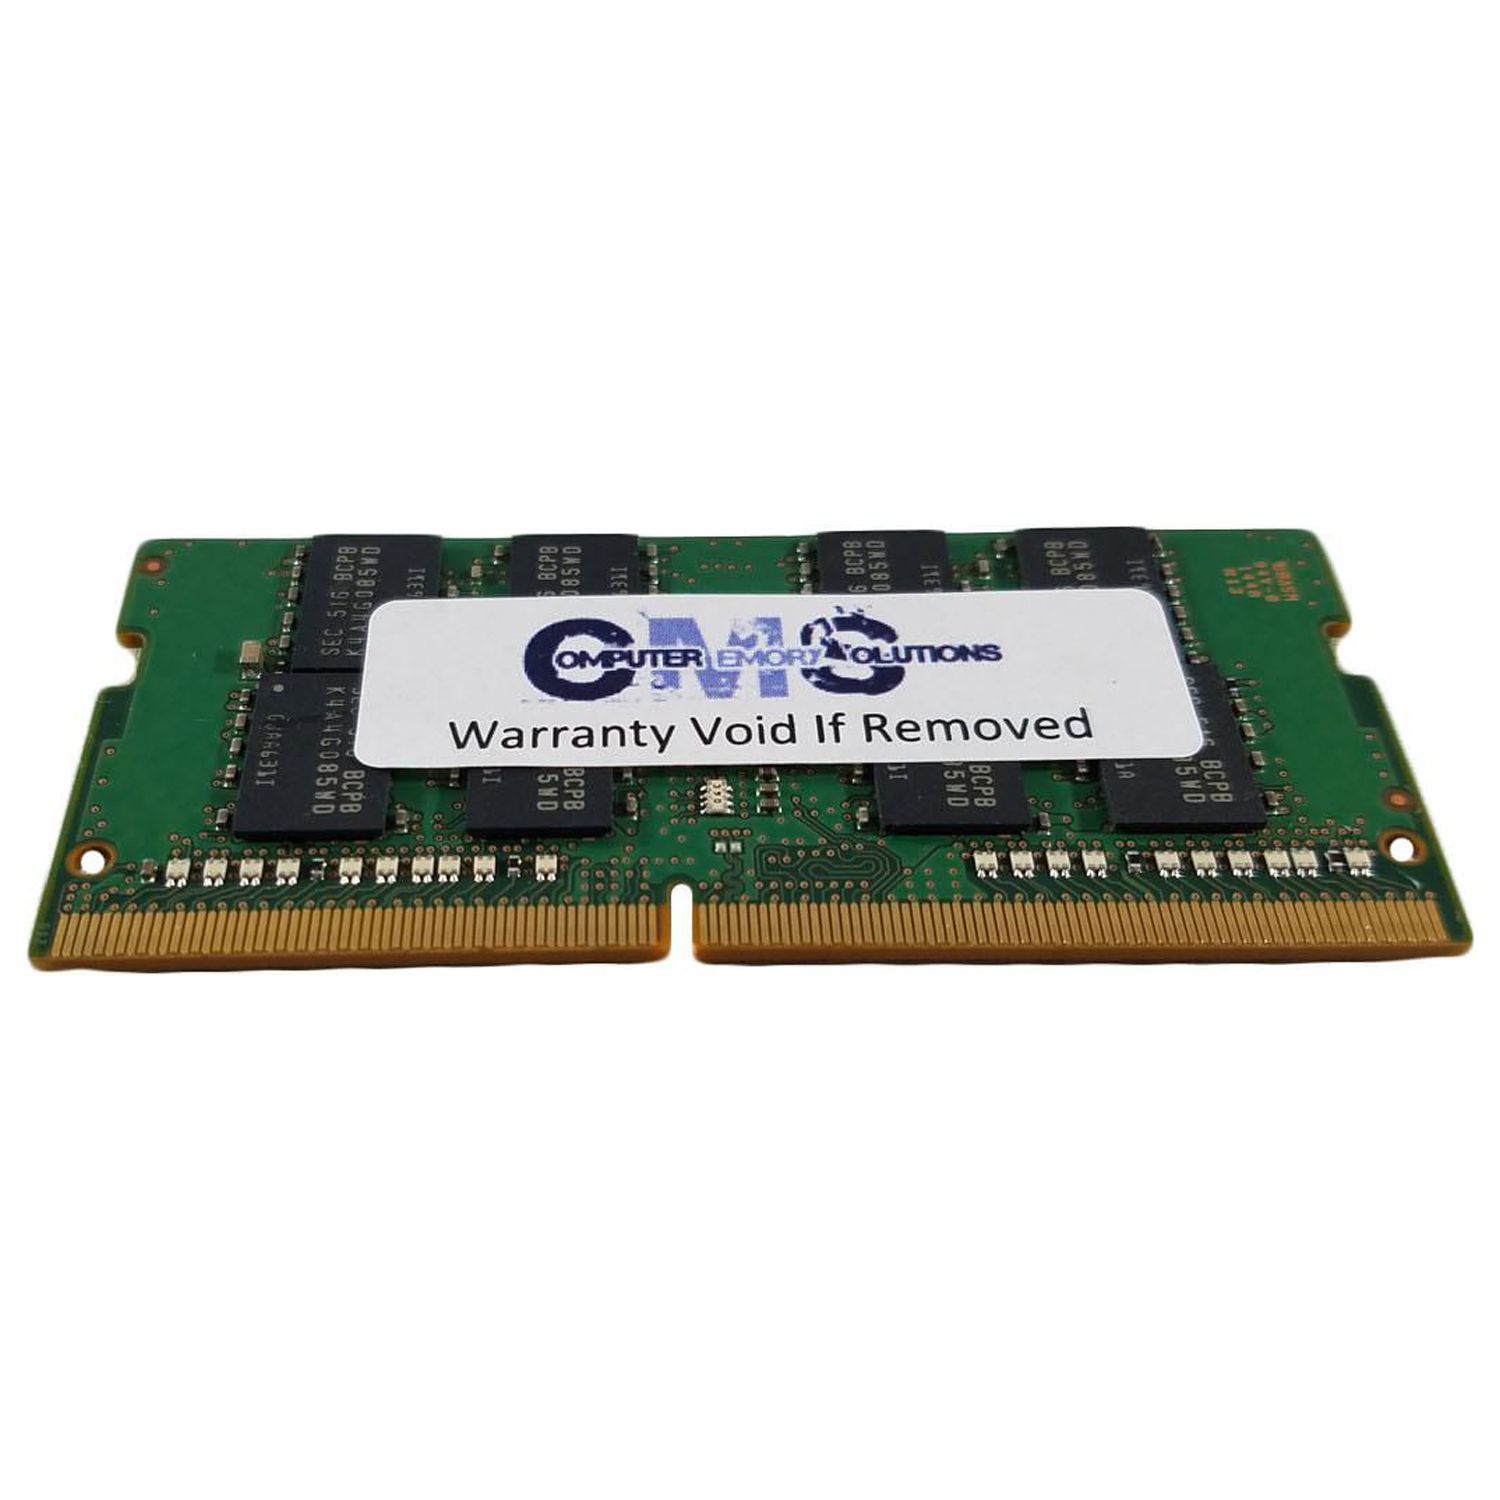 CMS 4GB (1X4GB) DDR4 19200 2400MHZ NON ECC SODIMM Memory Ram Compatible with HP/Compaq Workstation Z1 G3 - C105 - image 2 of 3